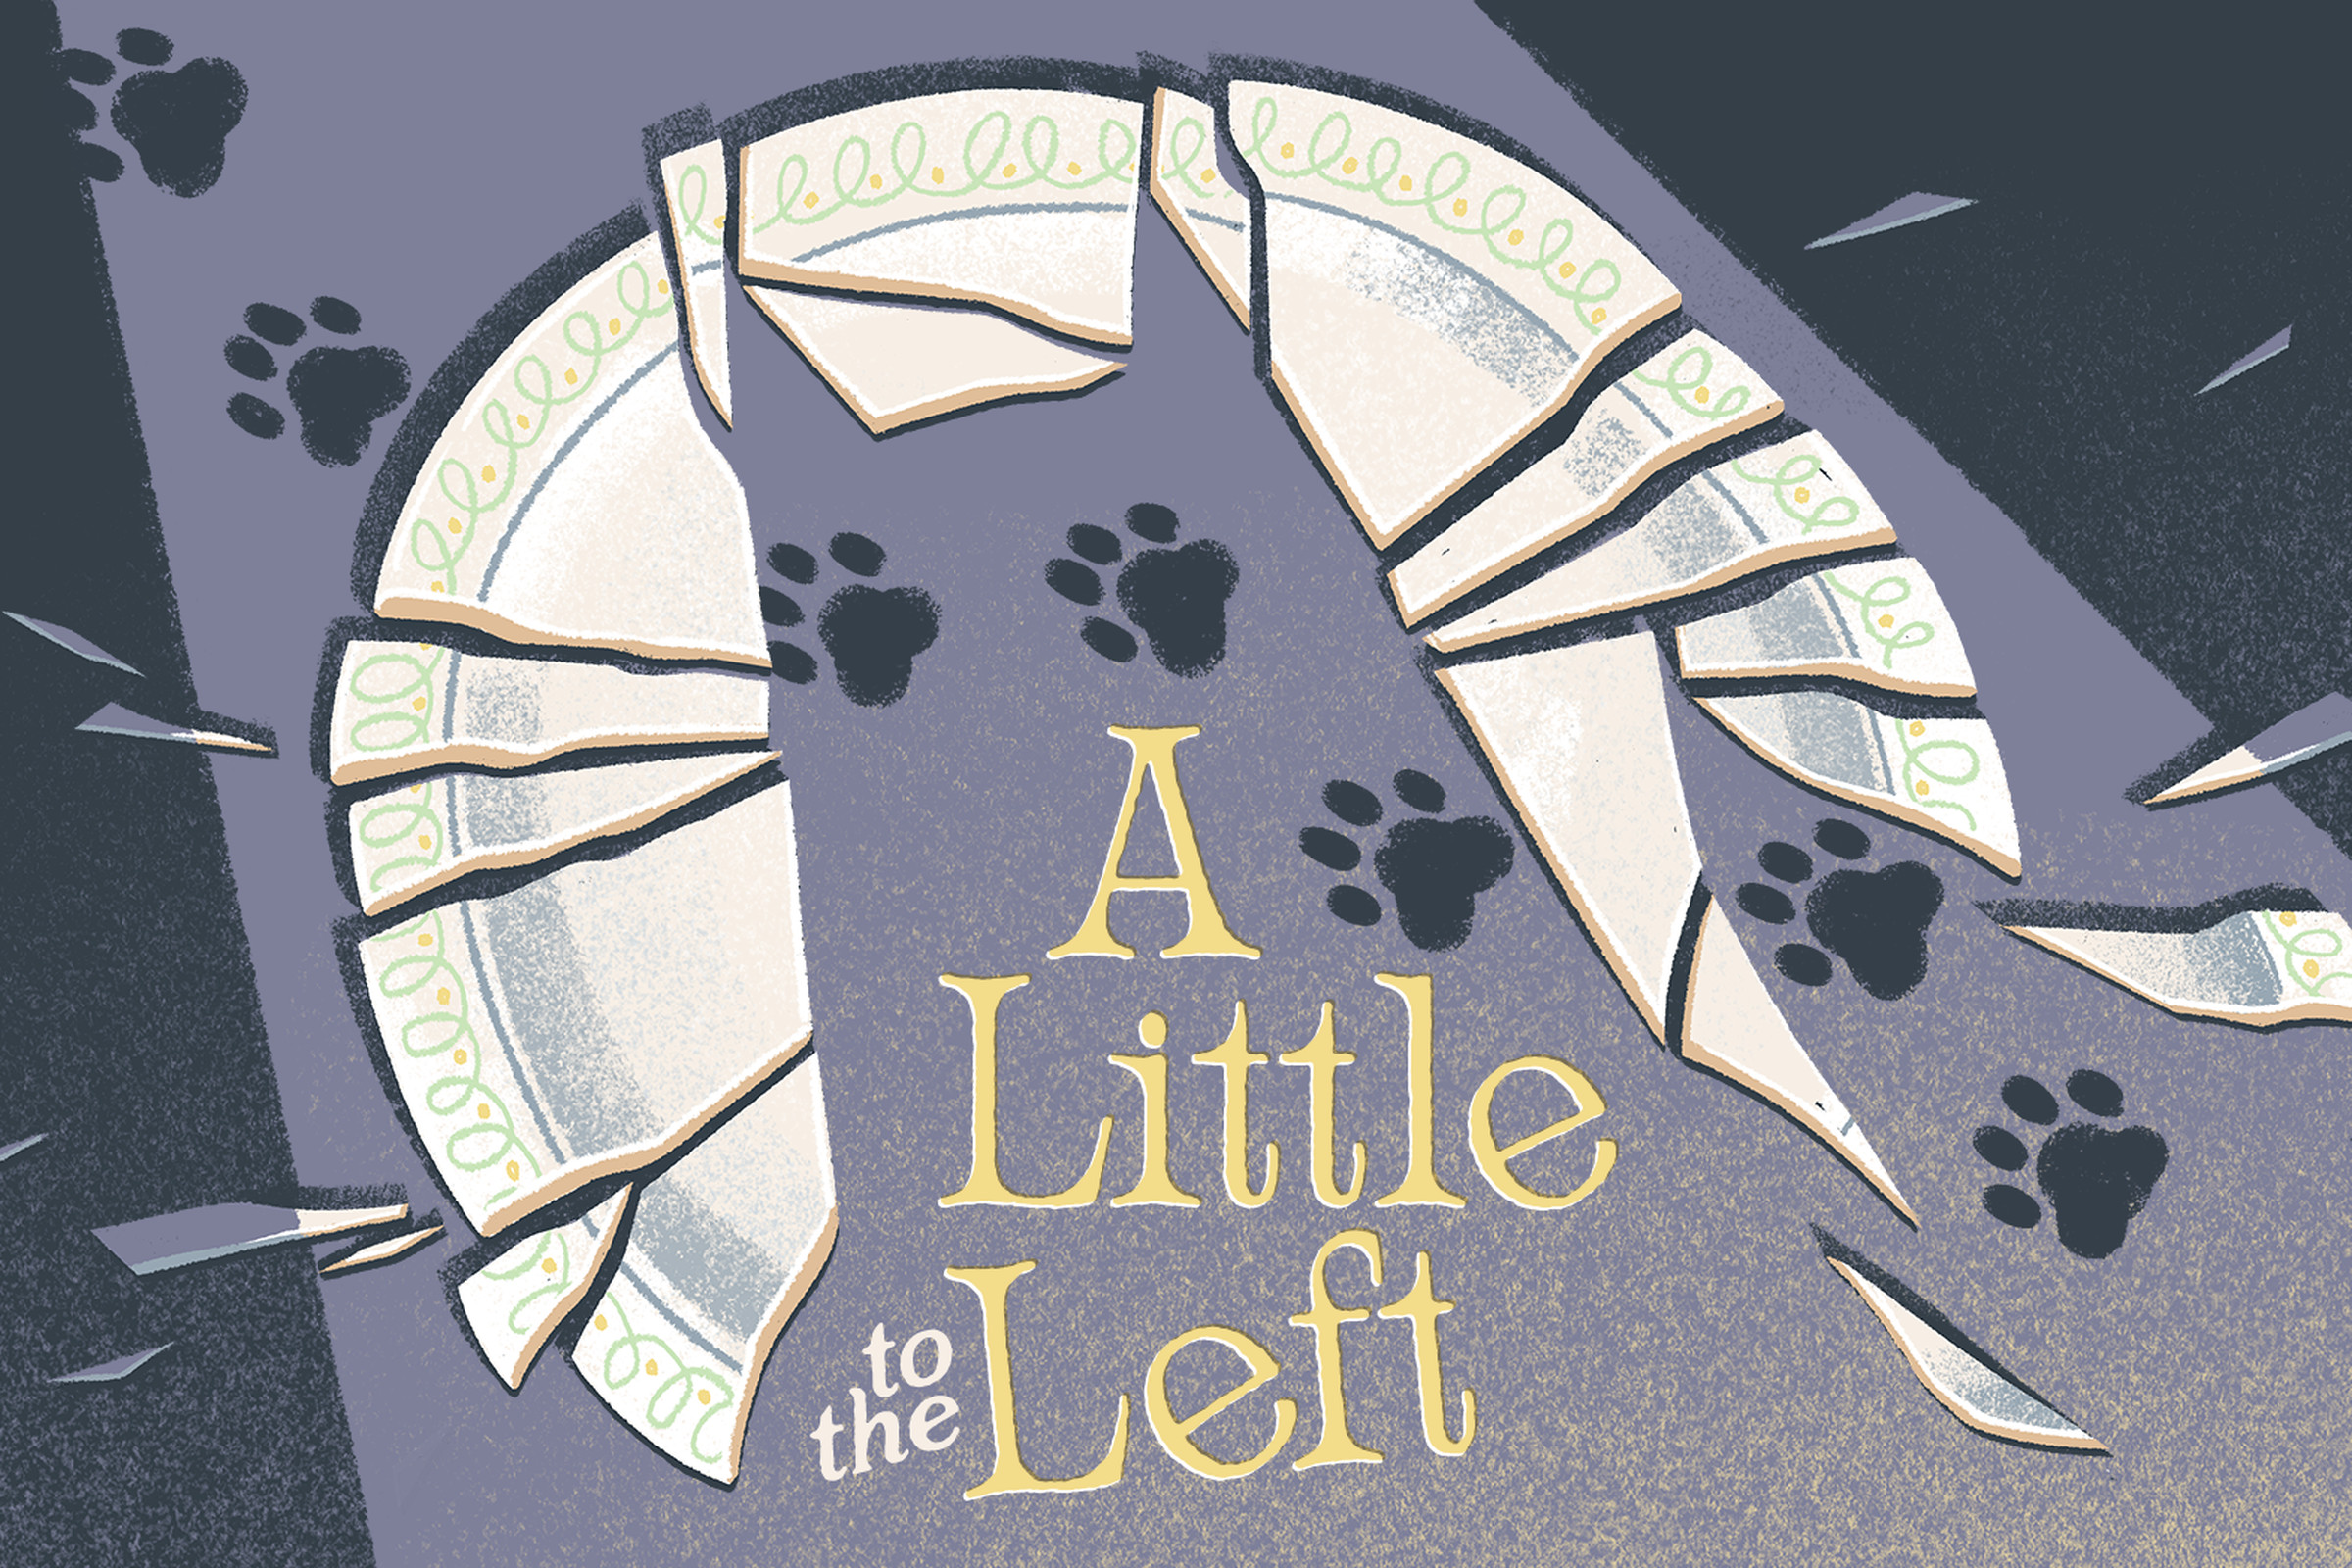 Key art from A Little to the Left featuring a broken plate and cat paw prints and the silhouette of a cat over the words “A Little to the Left” 